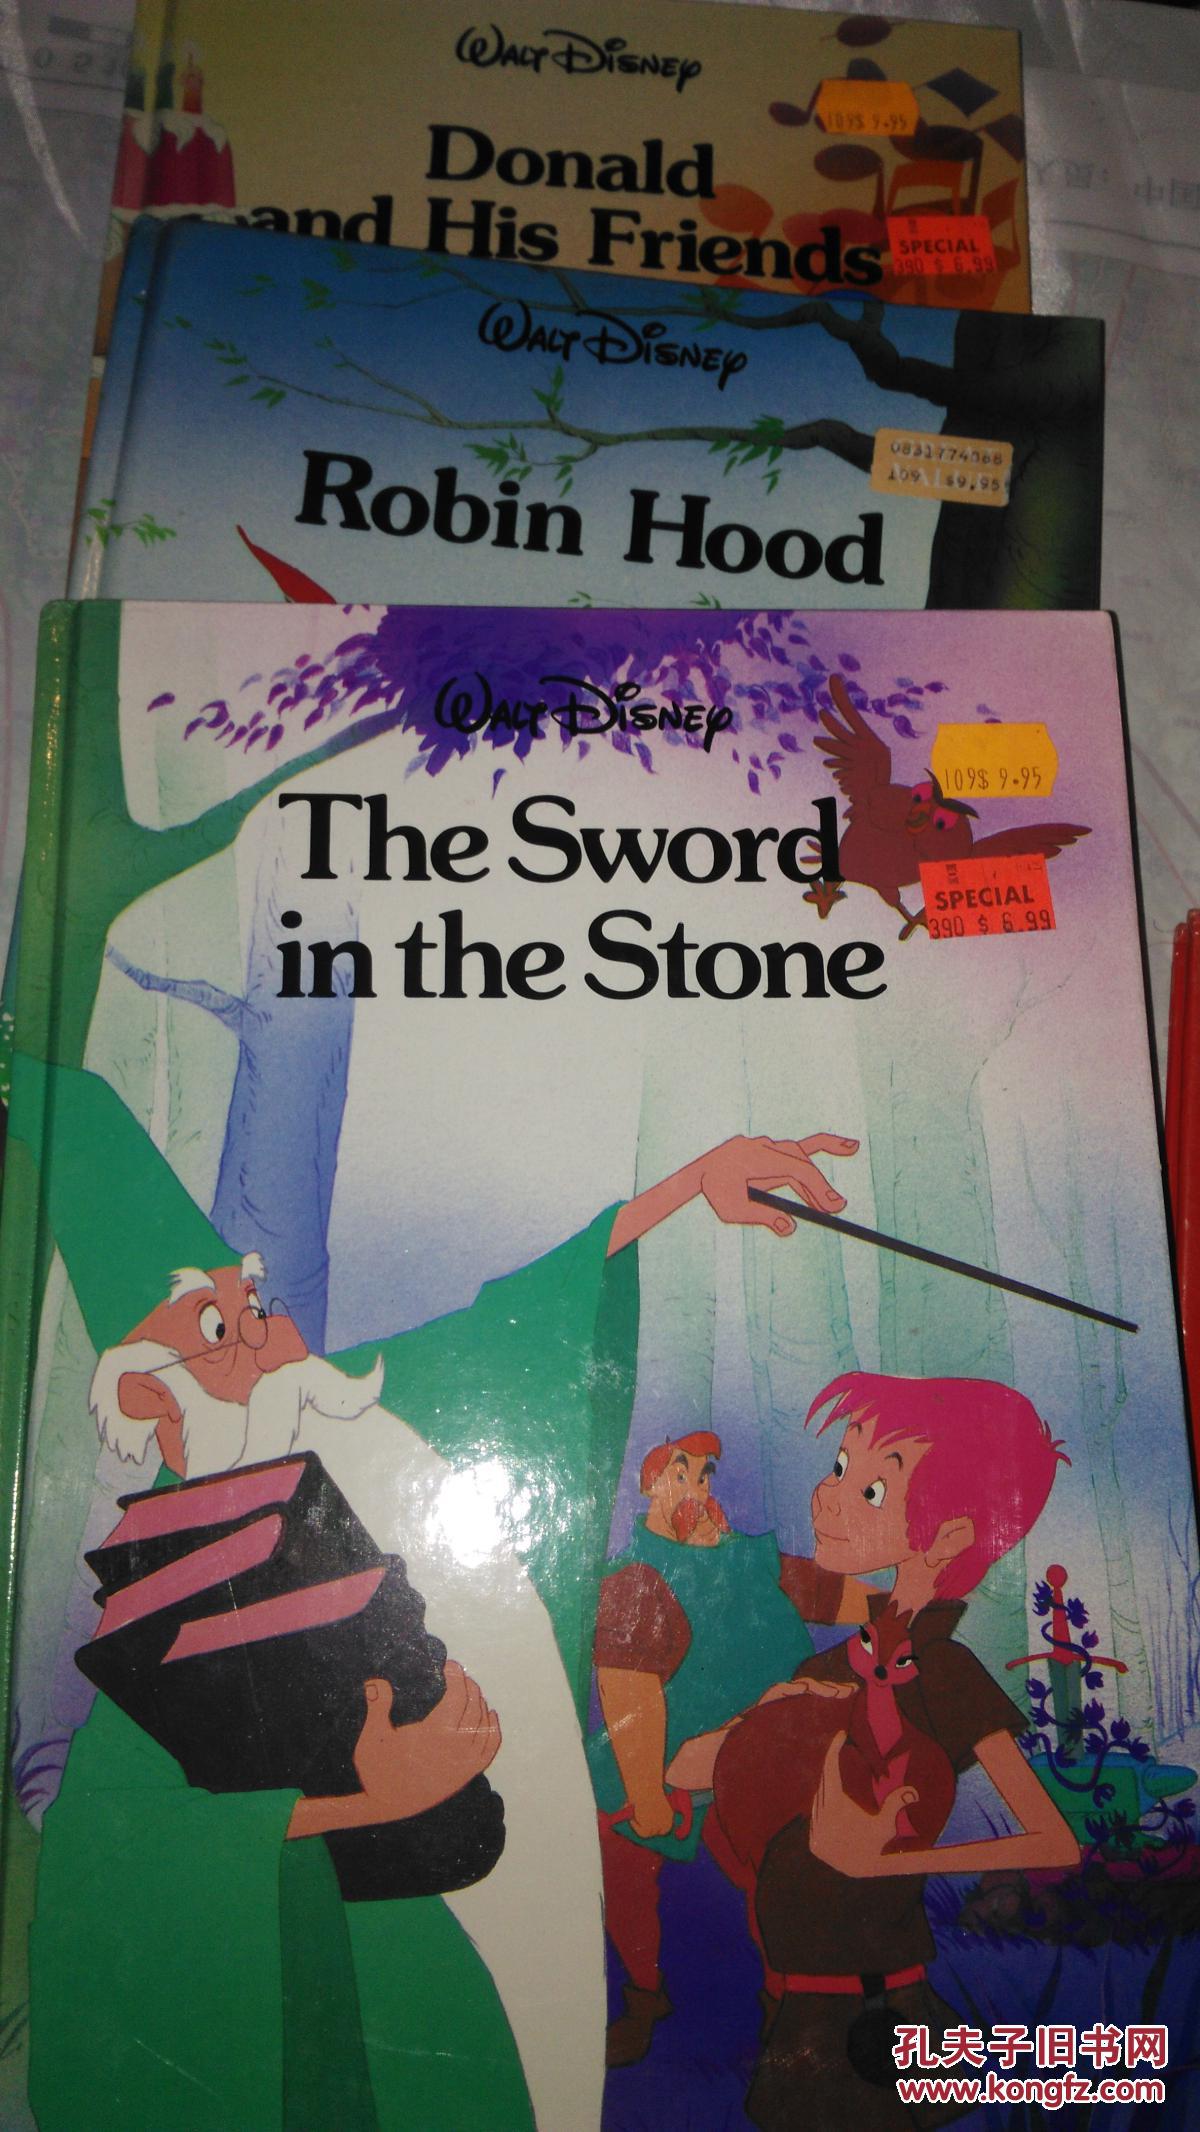 DONALD AND HIS FRIENDS/THE SWORD IN THE STONE/ROBIN HOOD(3本